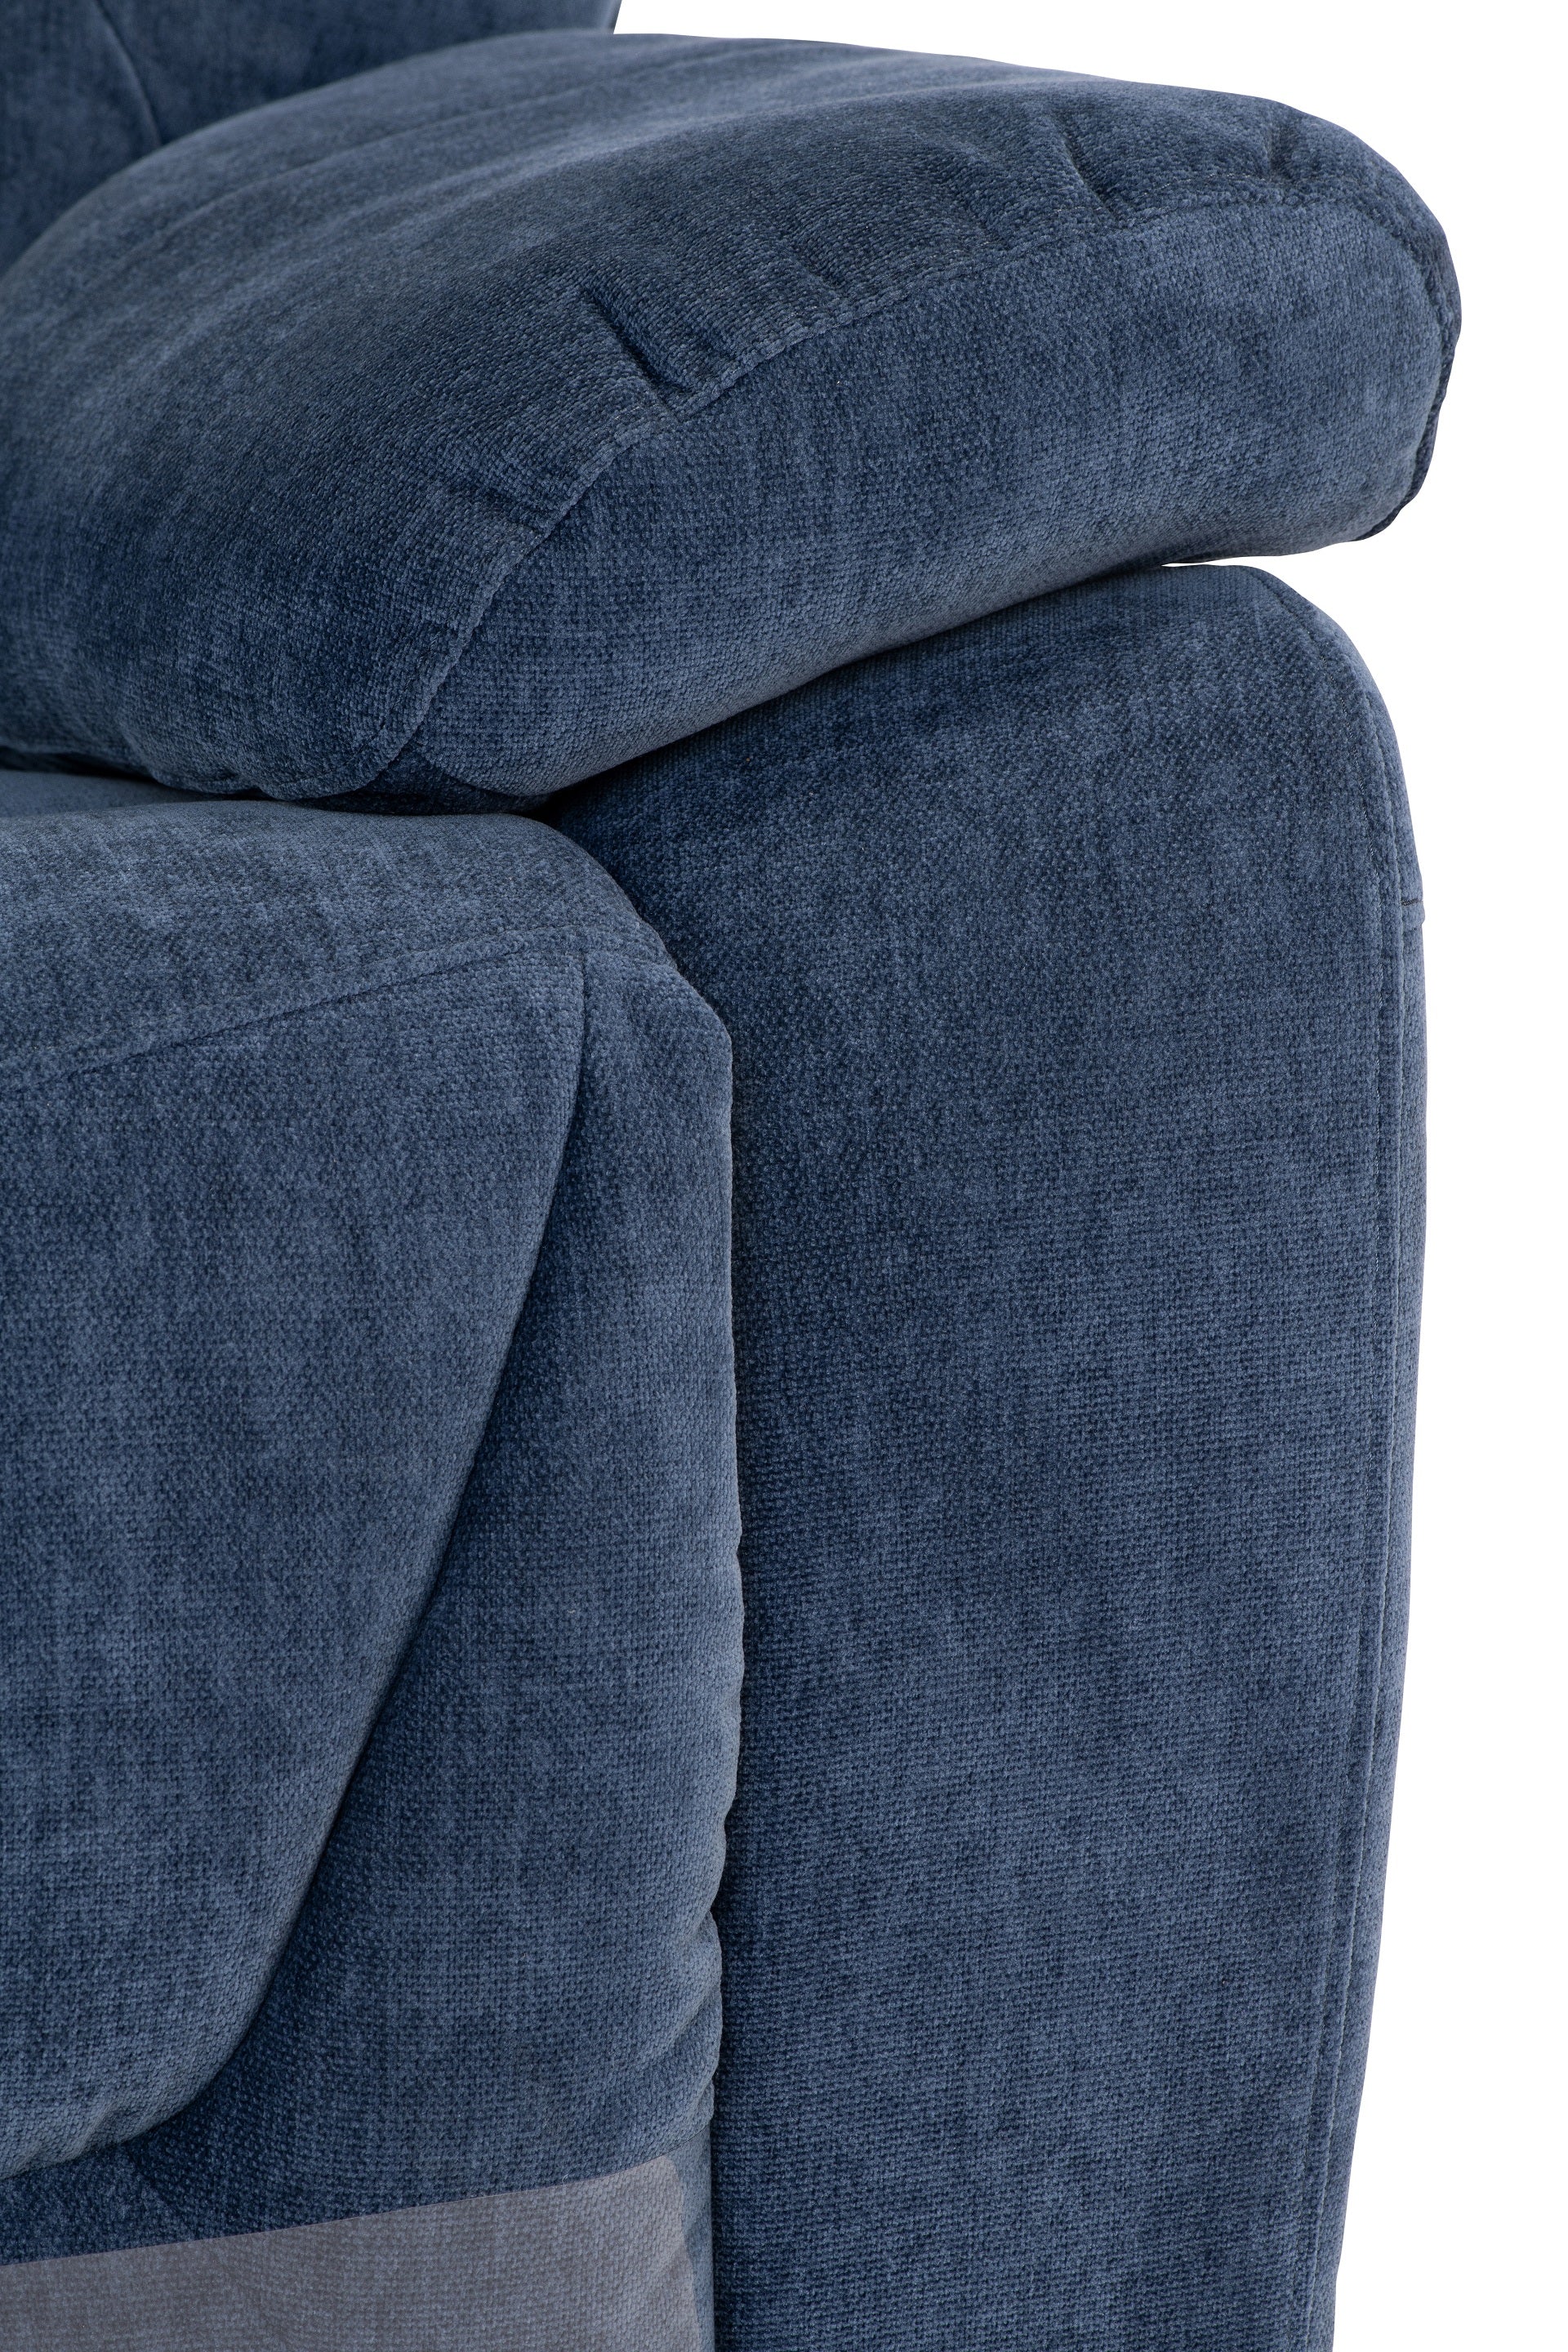 Hanna Fabric Electric 2 Seater Recliner - Blue